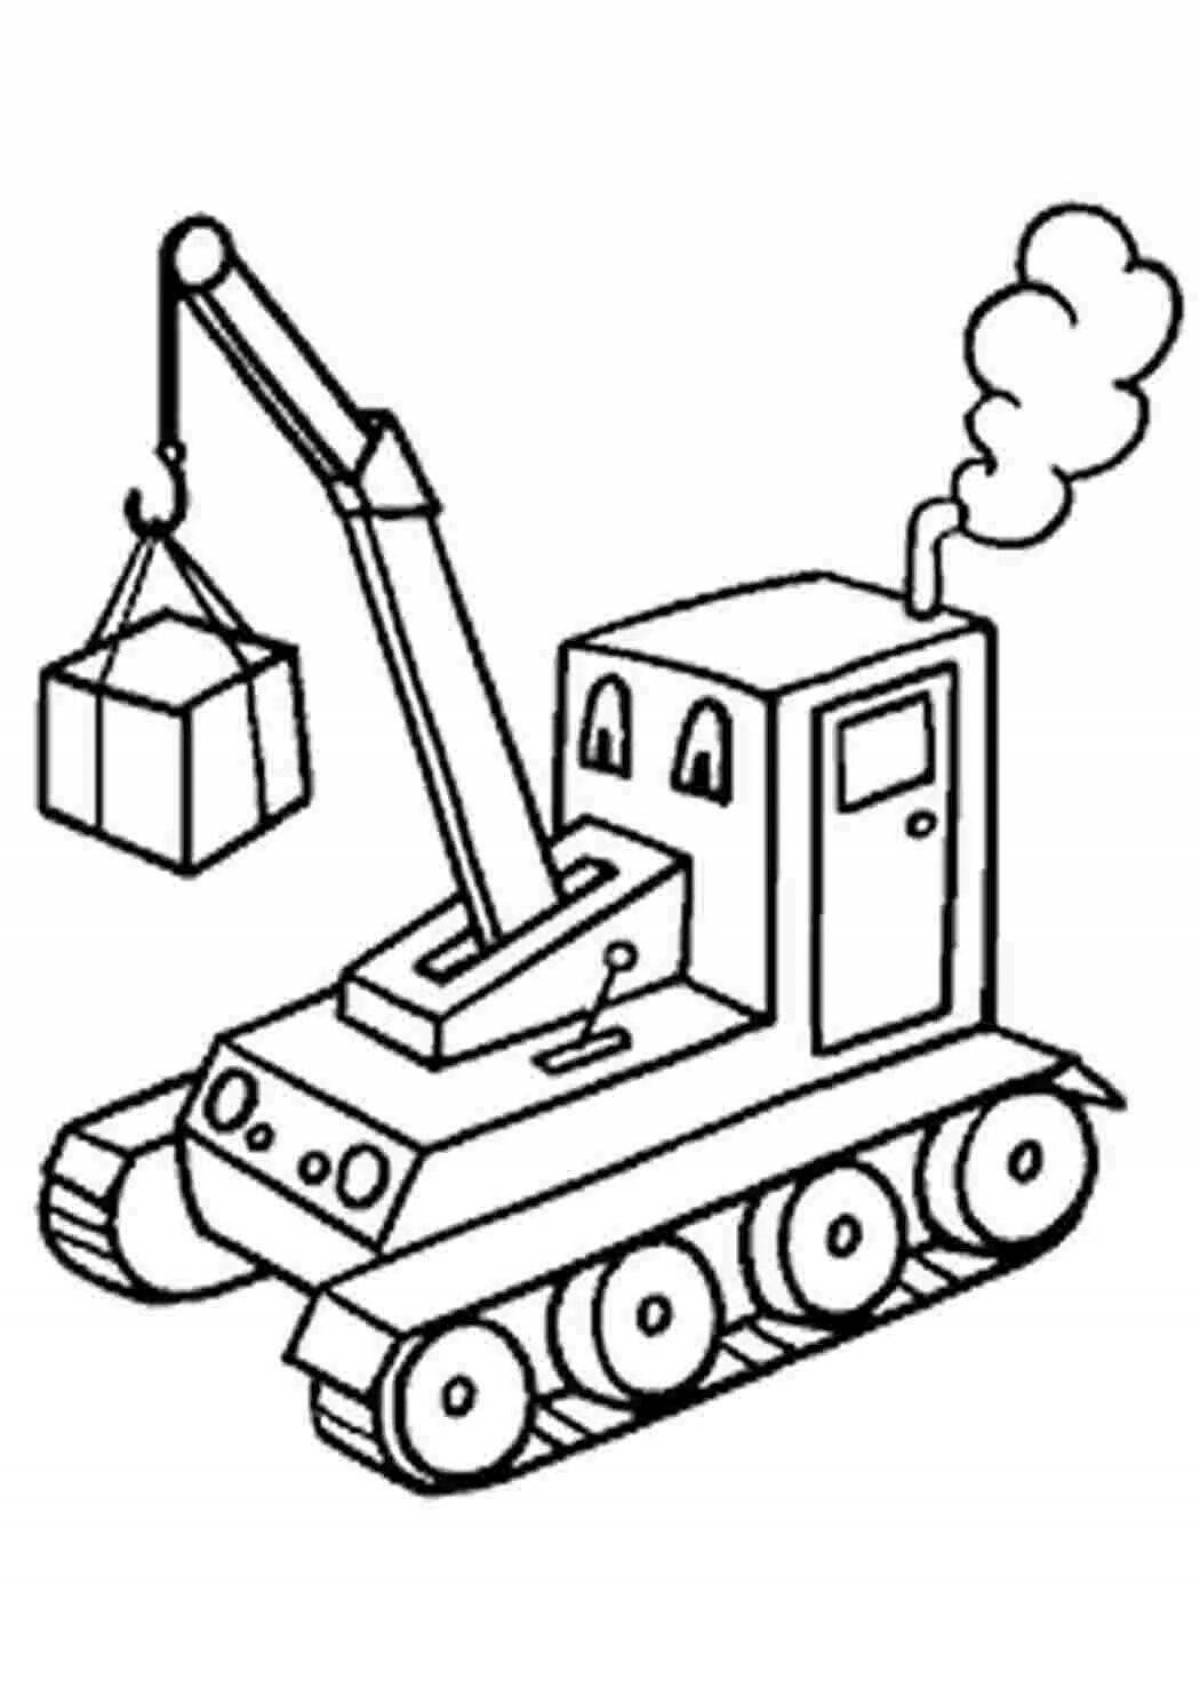 Gorgeous truck crane coloring book for kids